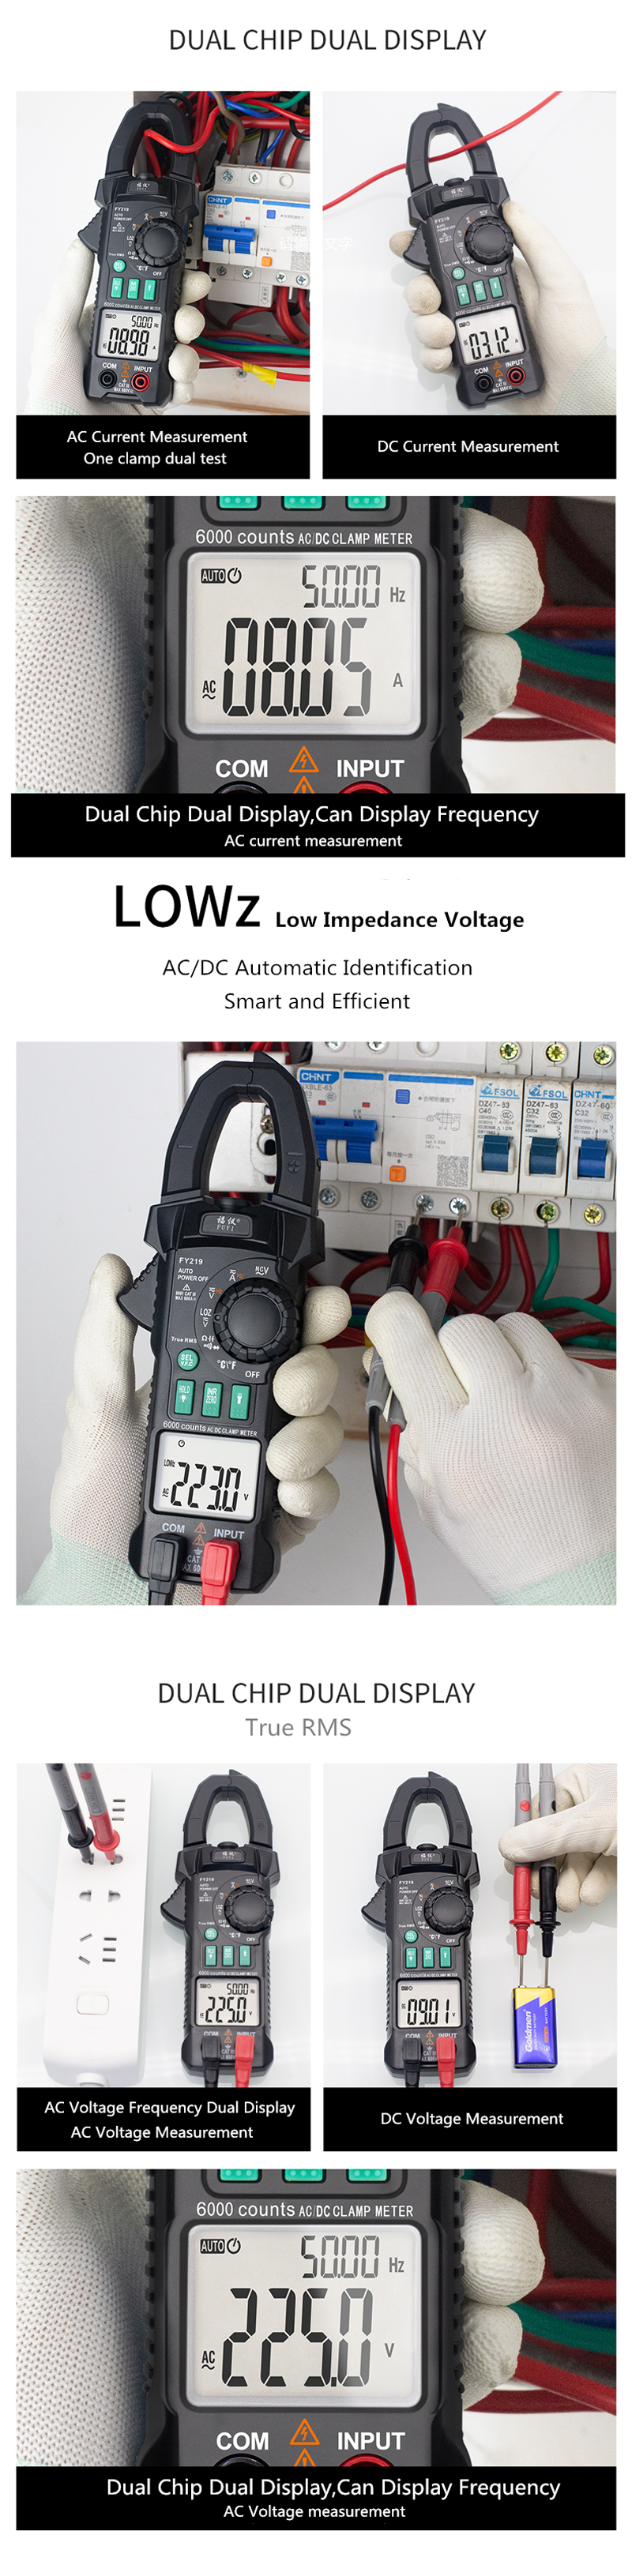 FUYI-FY219-Double-Display-ACDC-True-RMS-Digital-Clamp-Meter-Portable-Multimeter-Voltage-Current-Mete-1954245-2